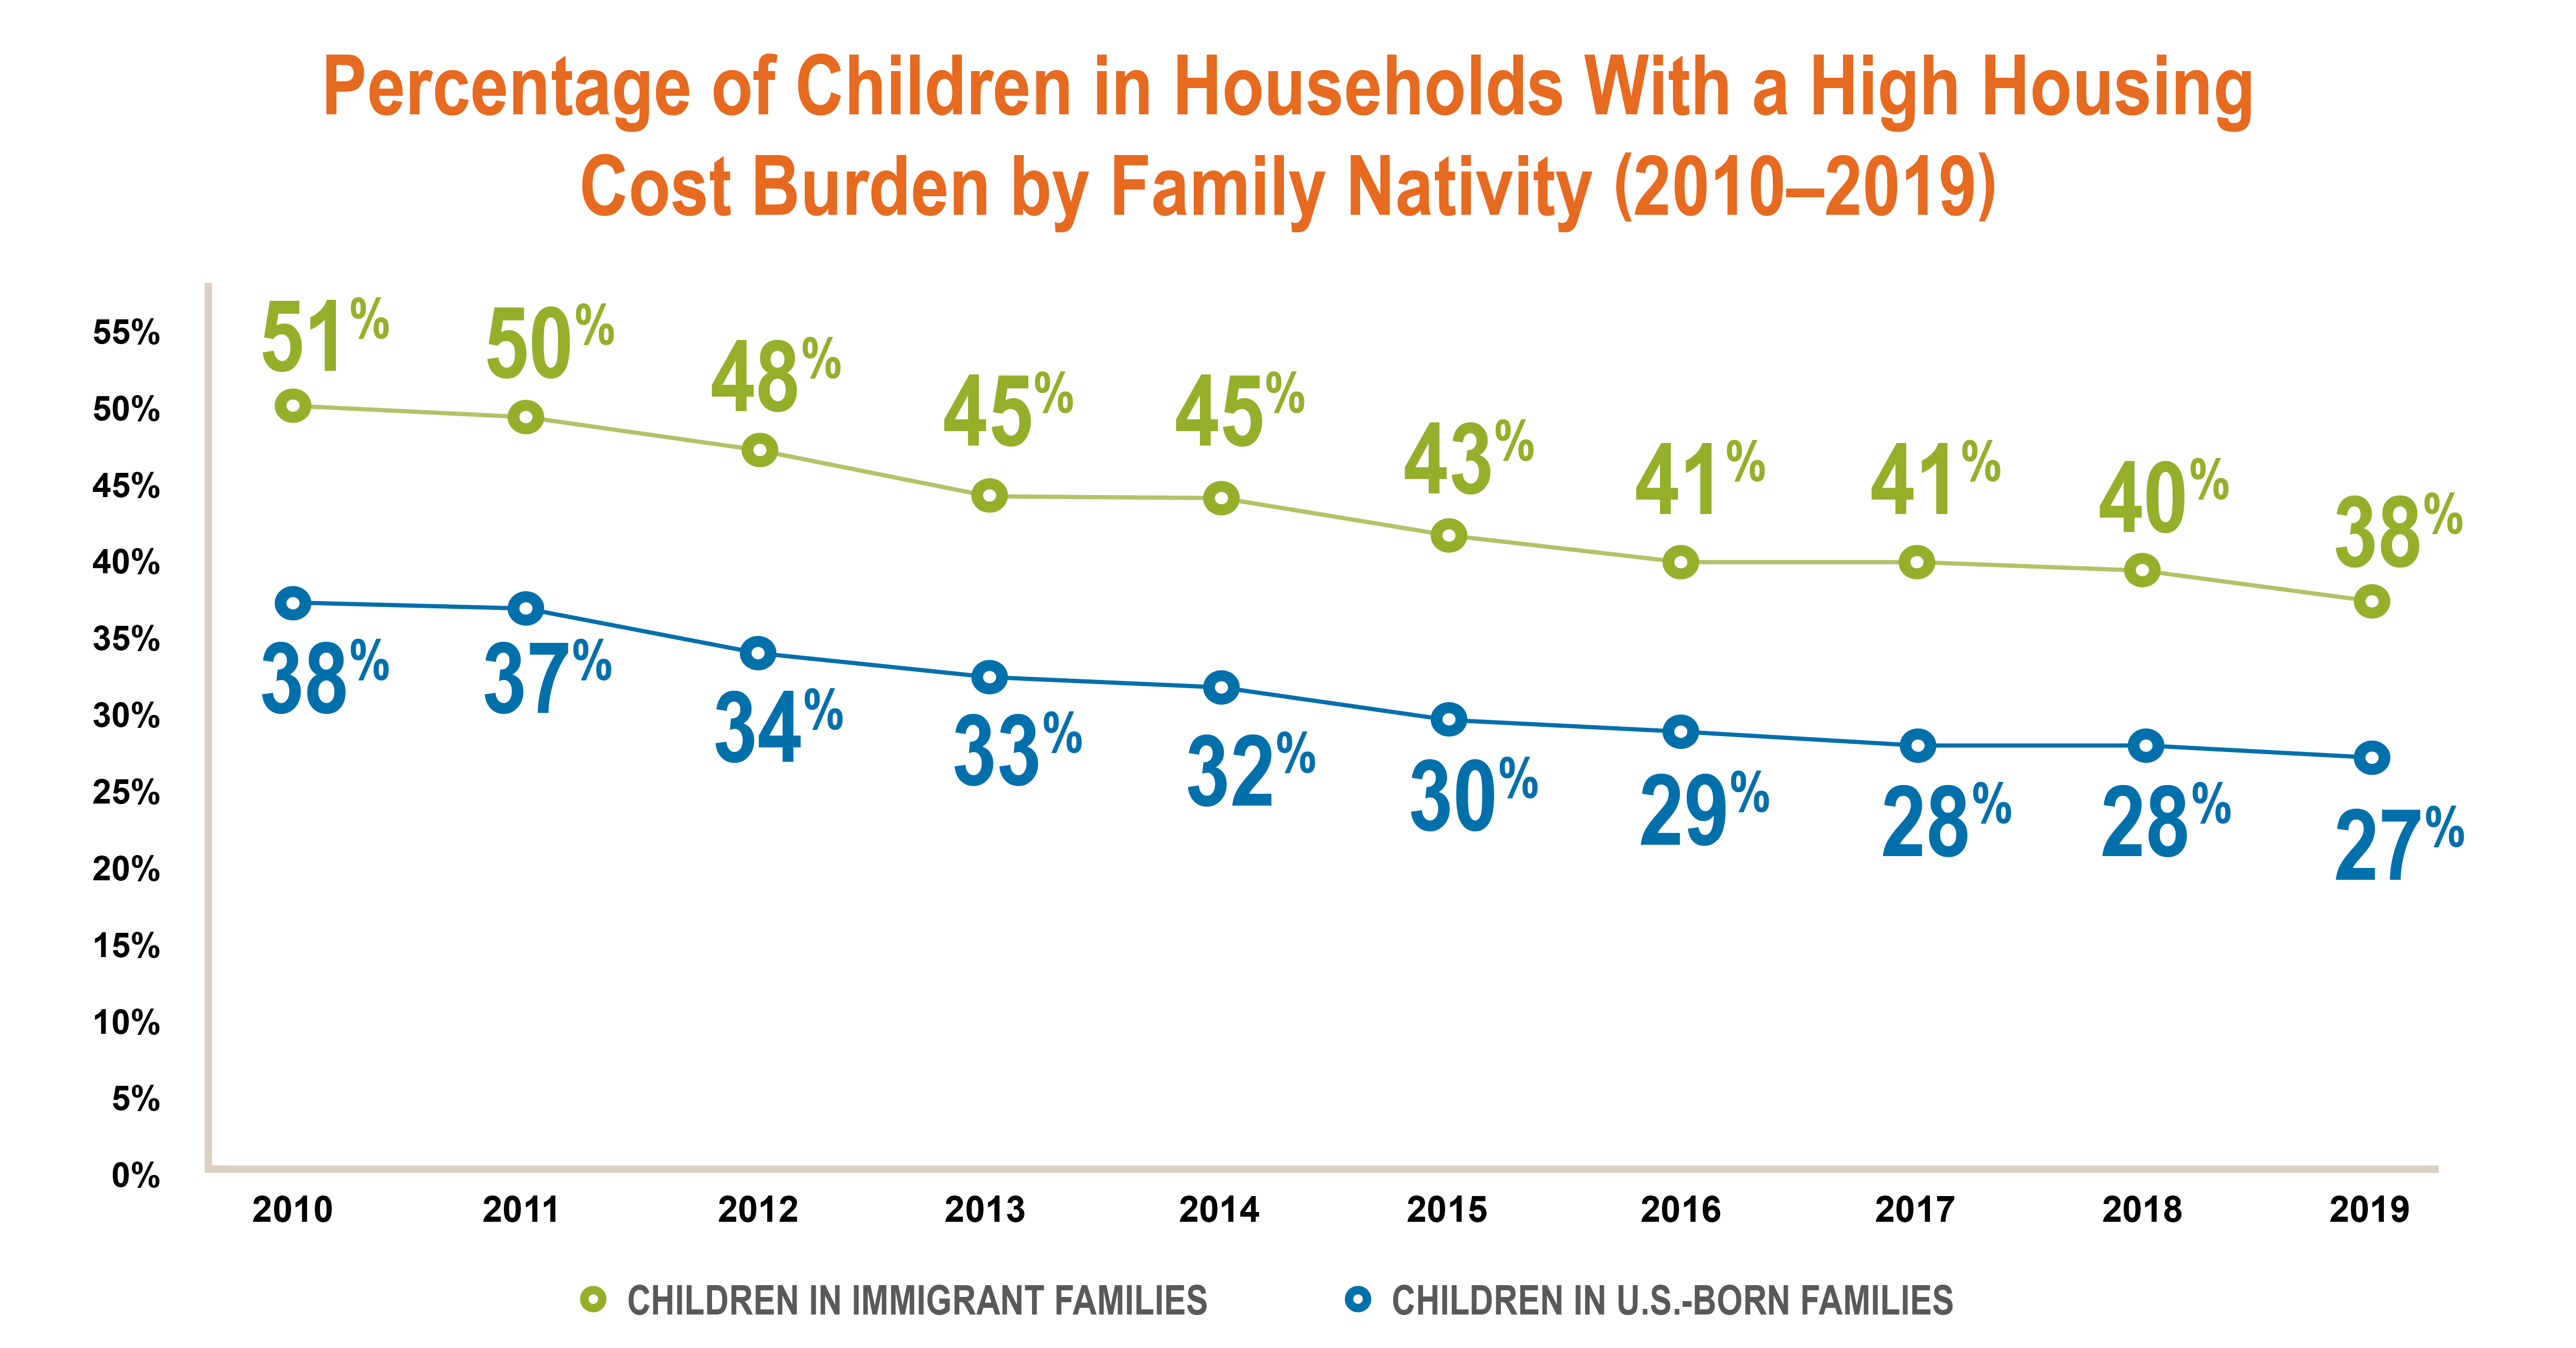 Percentage of Children in Households With a High Housing Cost Burden by Family Nativity